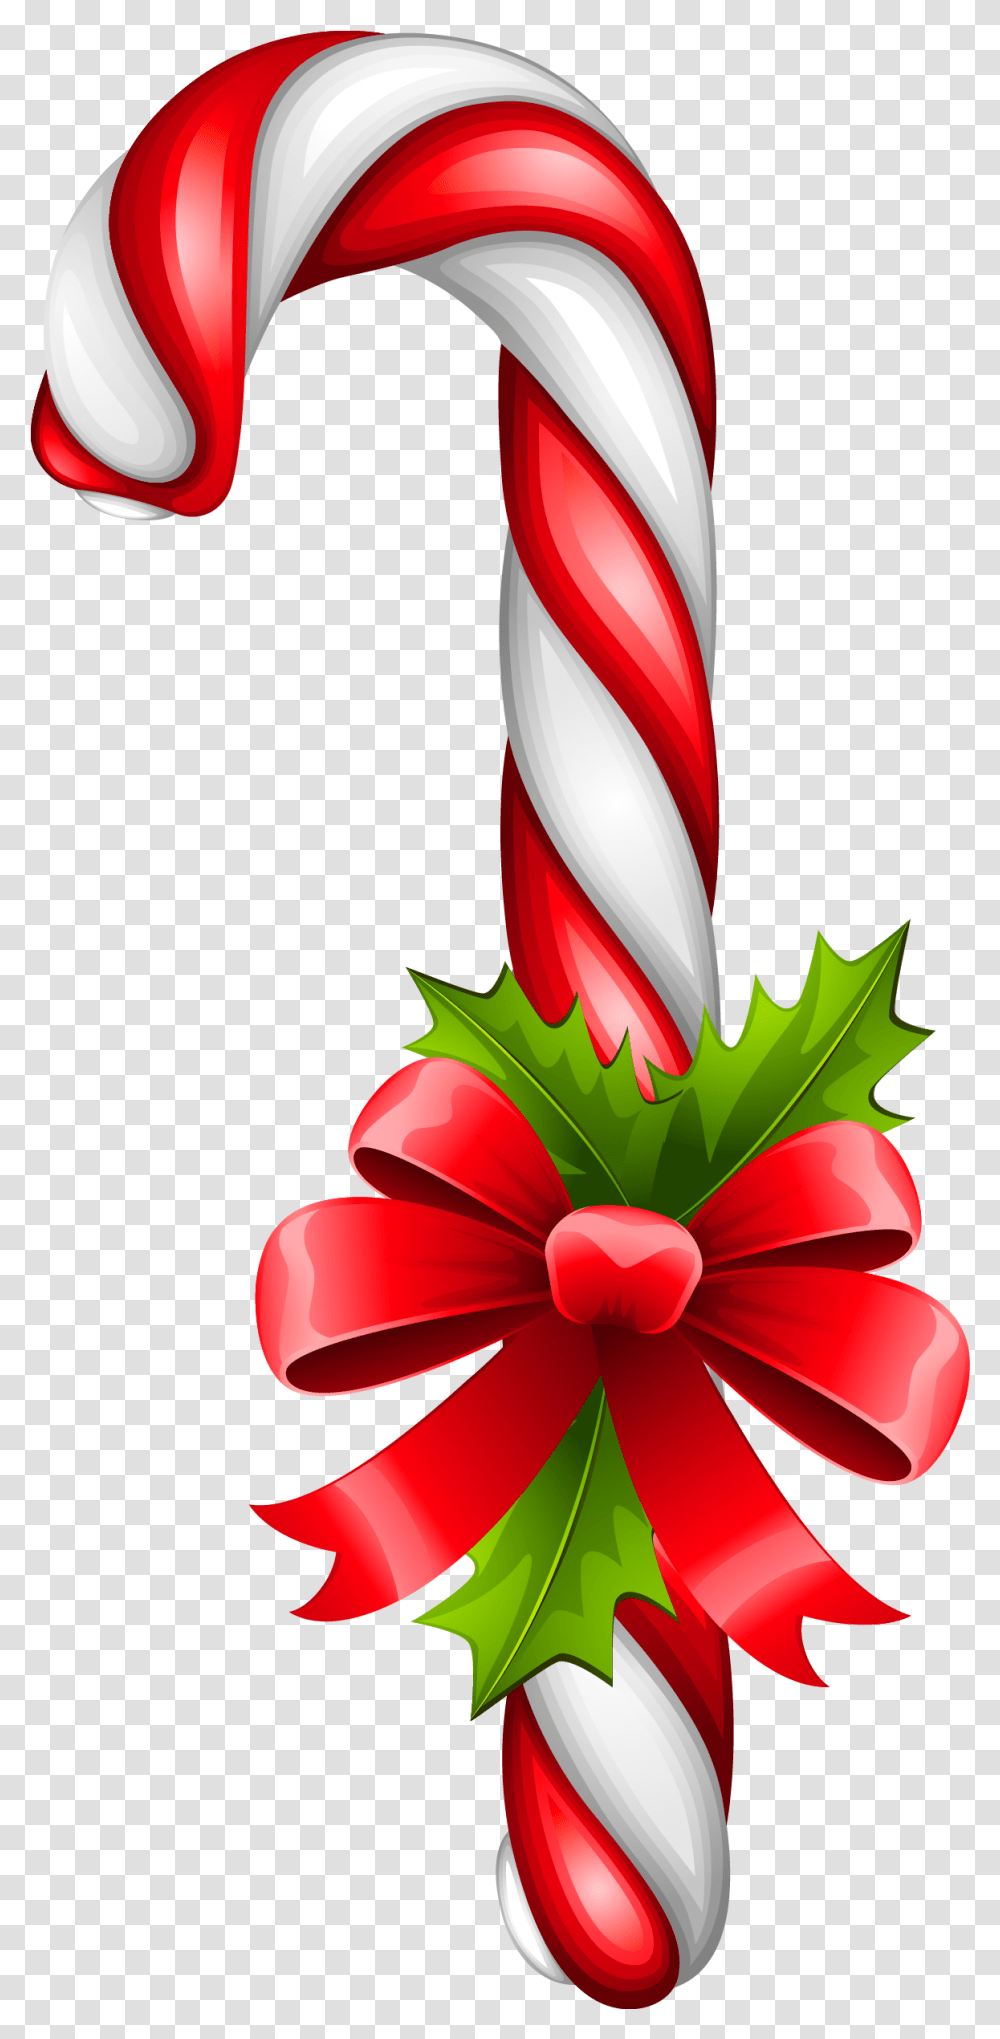 Candy Cane Christmas Clip Art Christmas Candy Cane, Plant, Food, Gift, Flower Transparent Png